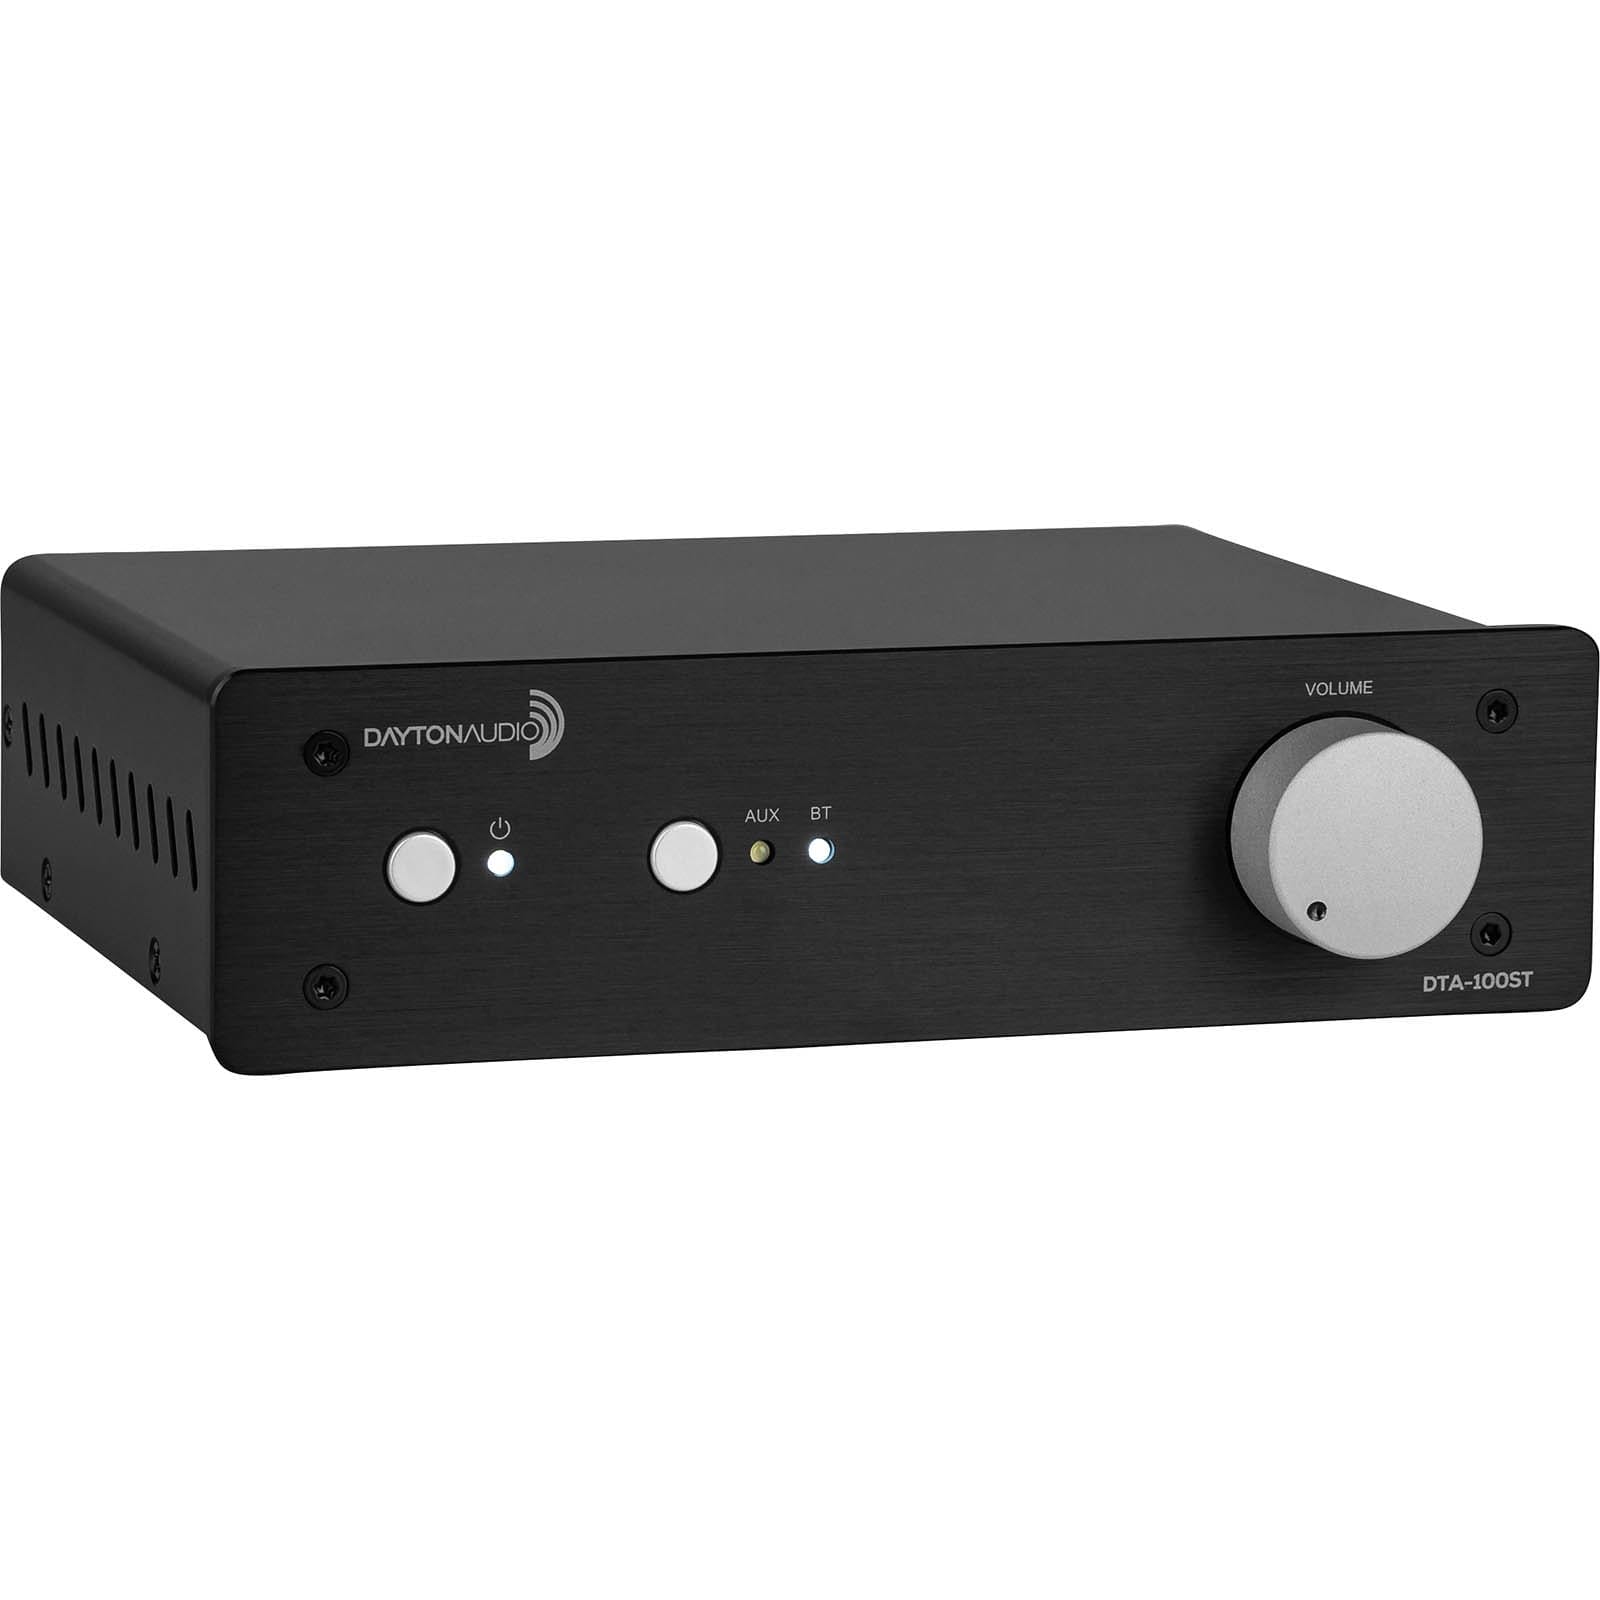 Image of Dayton Audio DTA-100ST 100W Desktop Stereo Amplifier with Bluetooth 5.0